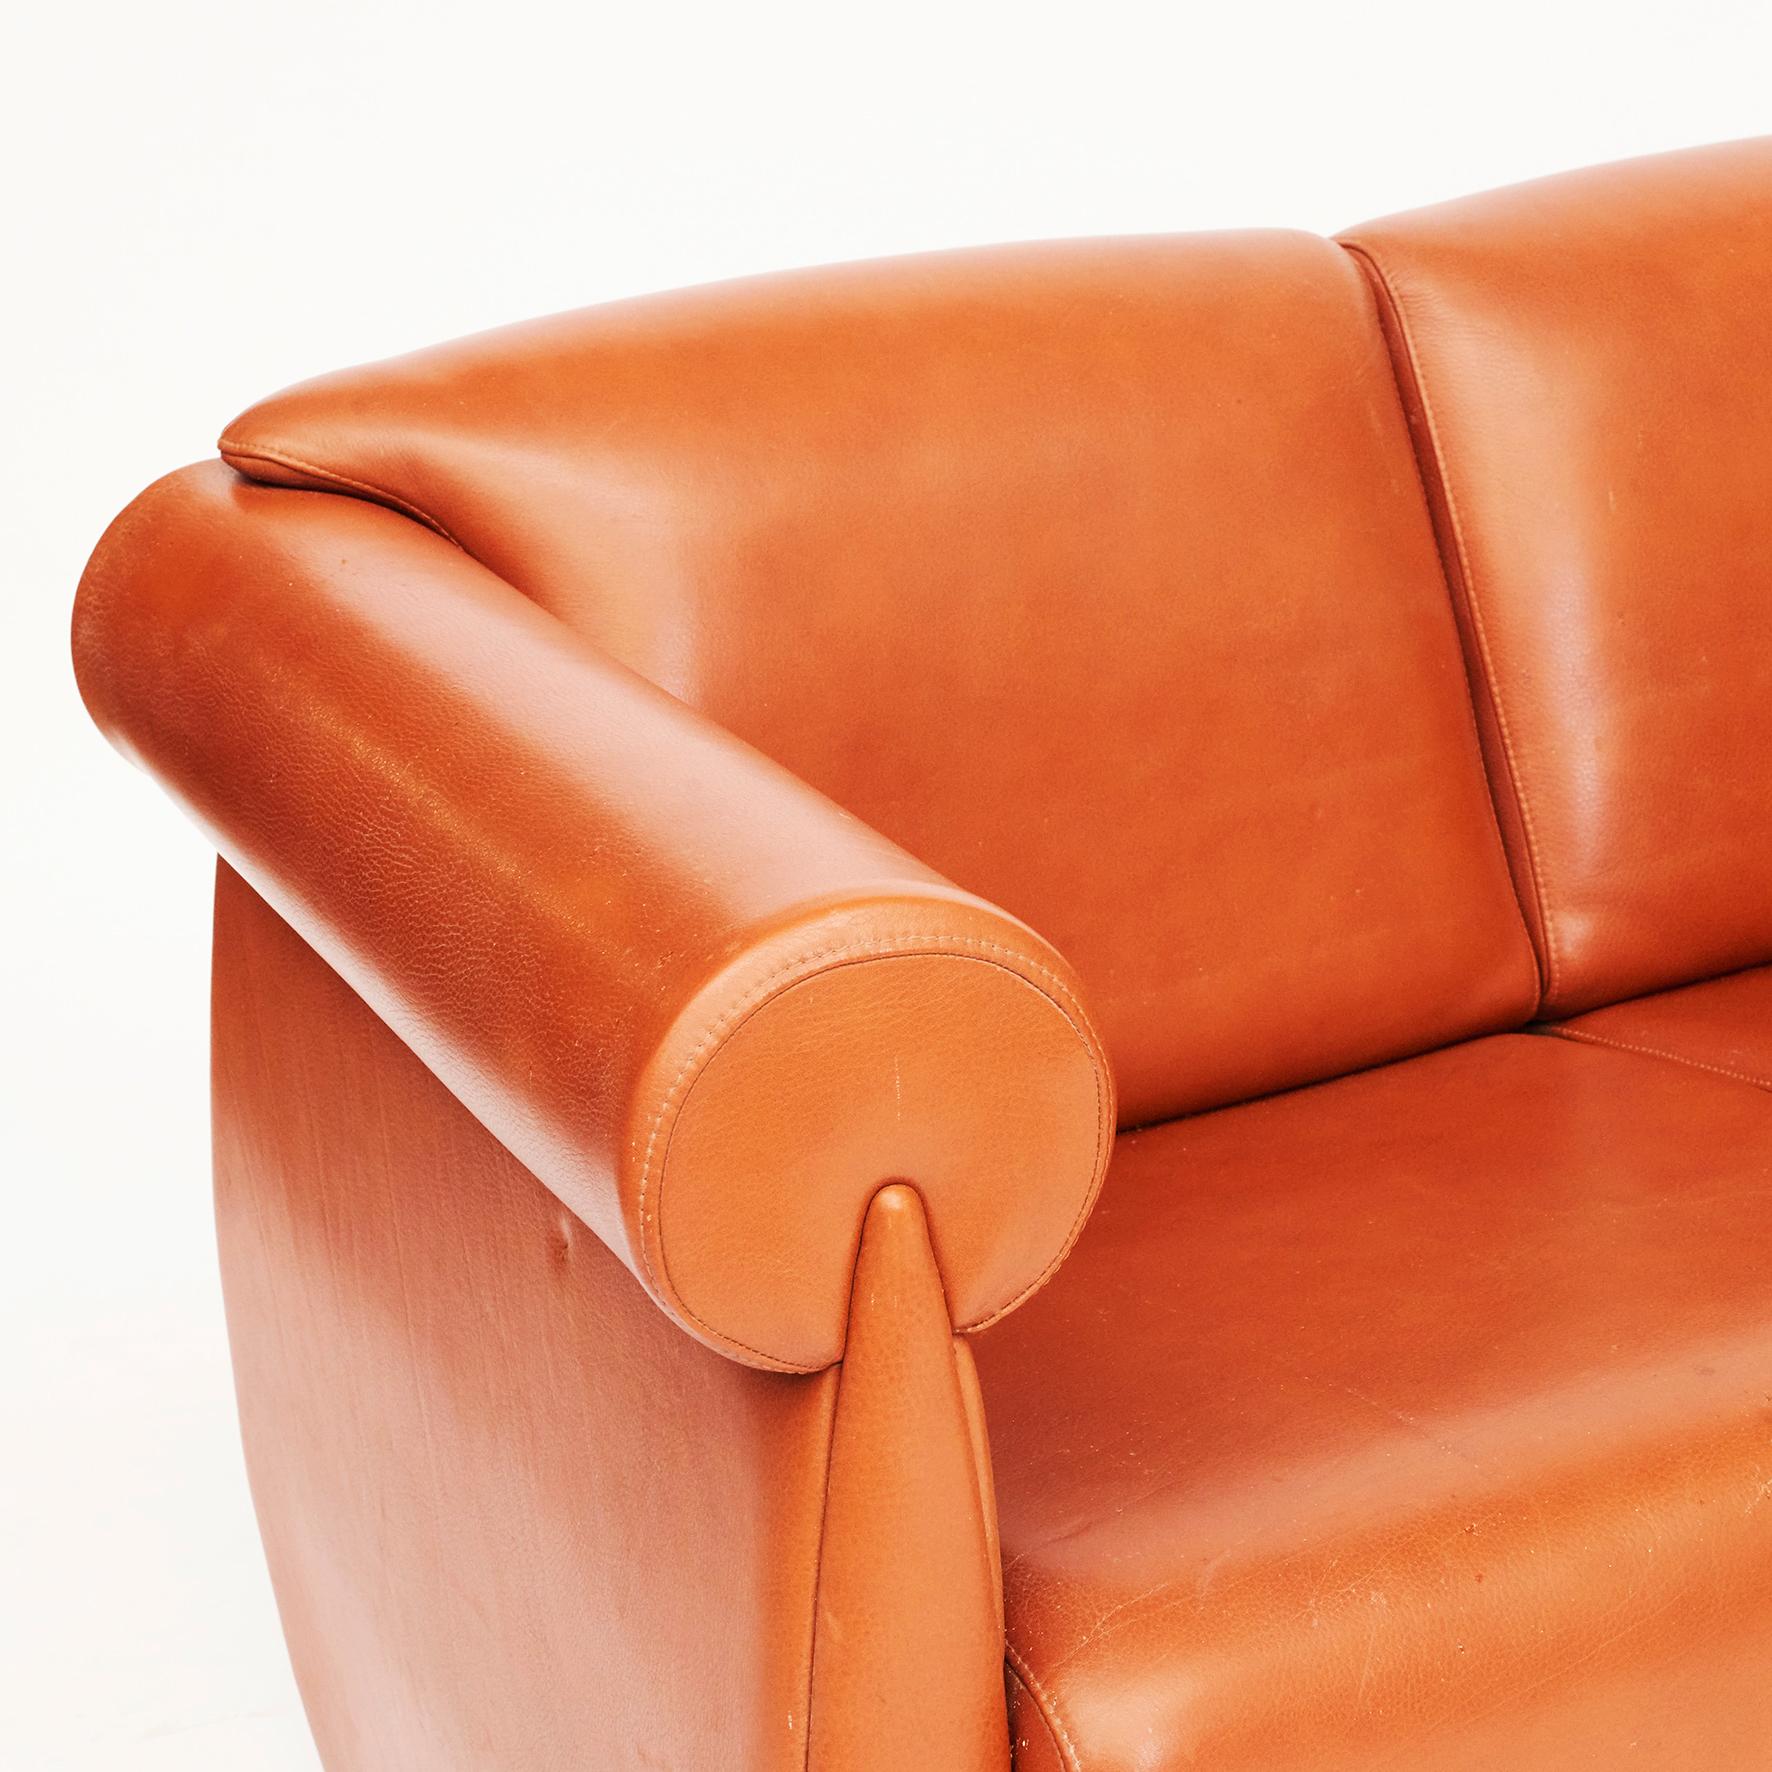 Rare Cognac Colored Leather Sofa by Klaus Wettergren In Good Condition For Sale In Kastrup, DK